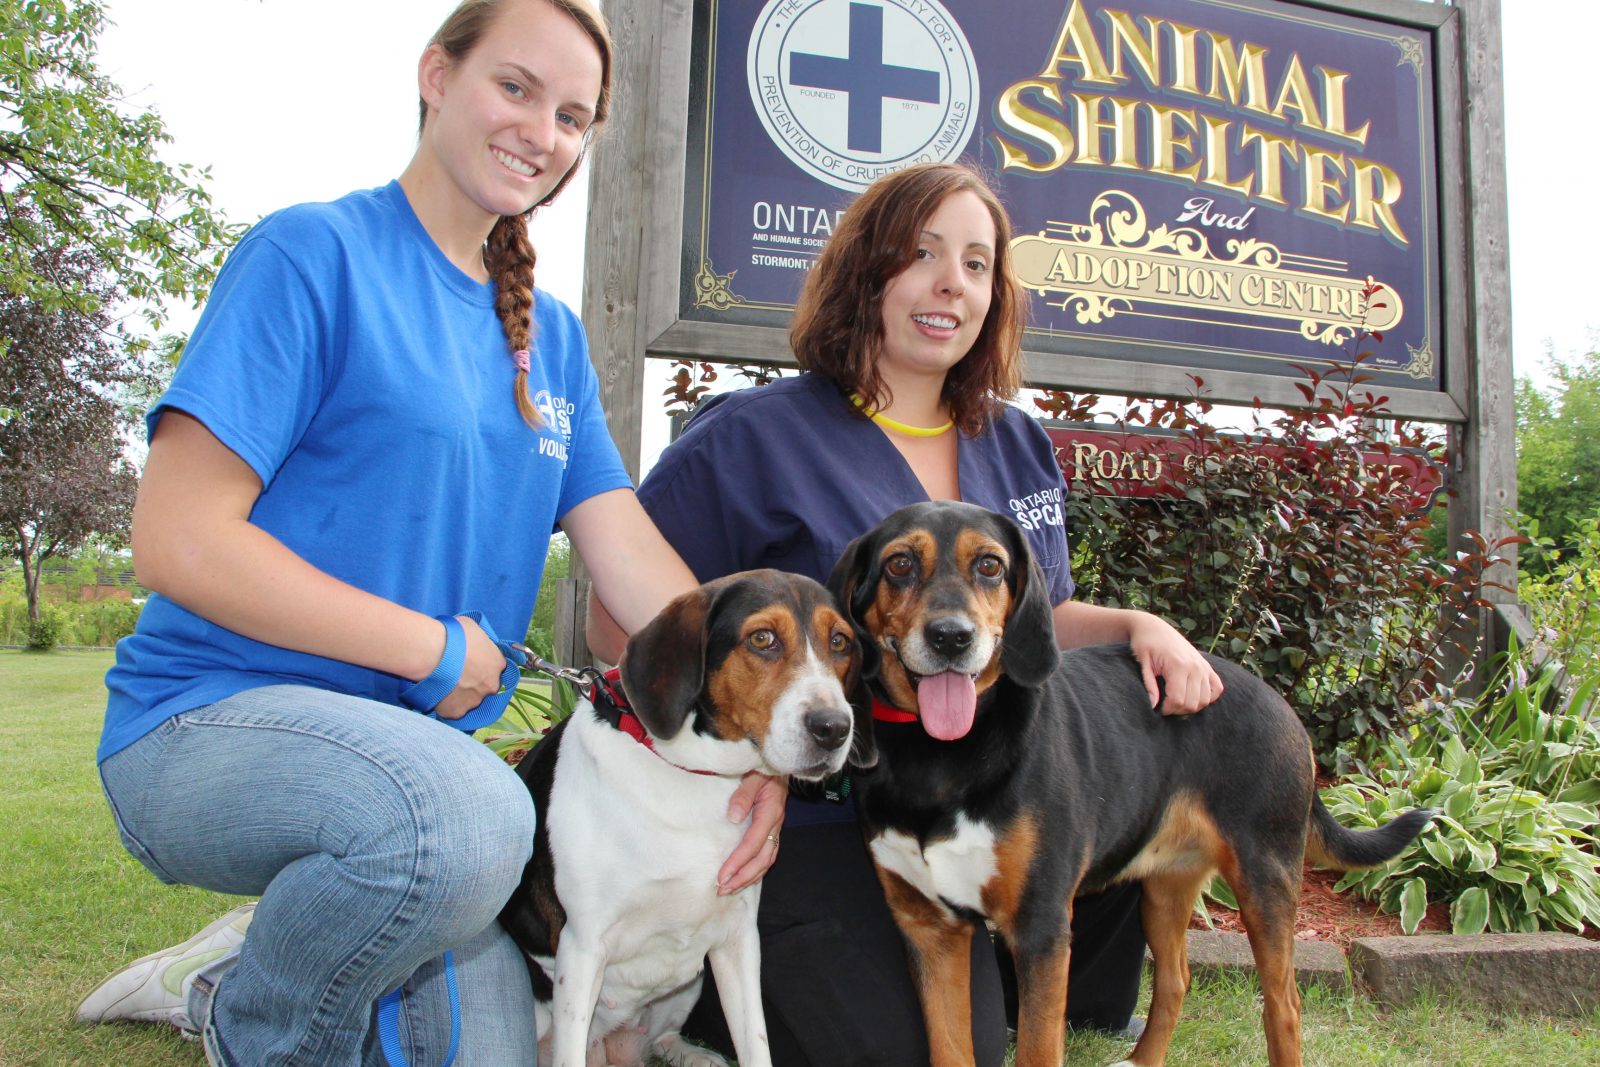 Inseparable hound dogs need new home